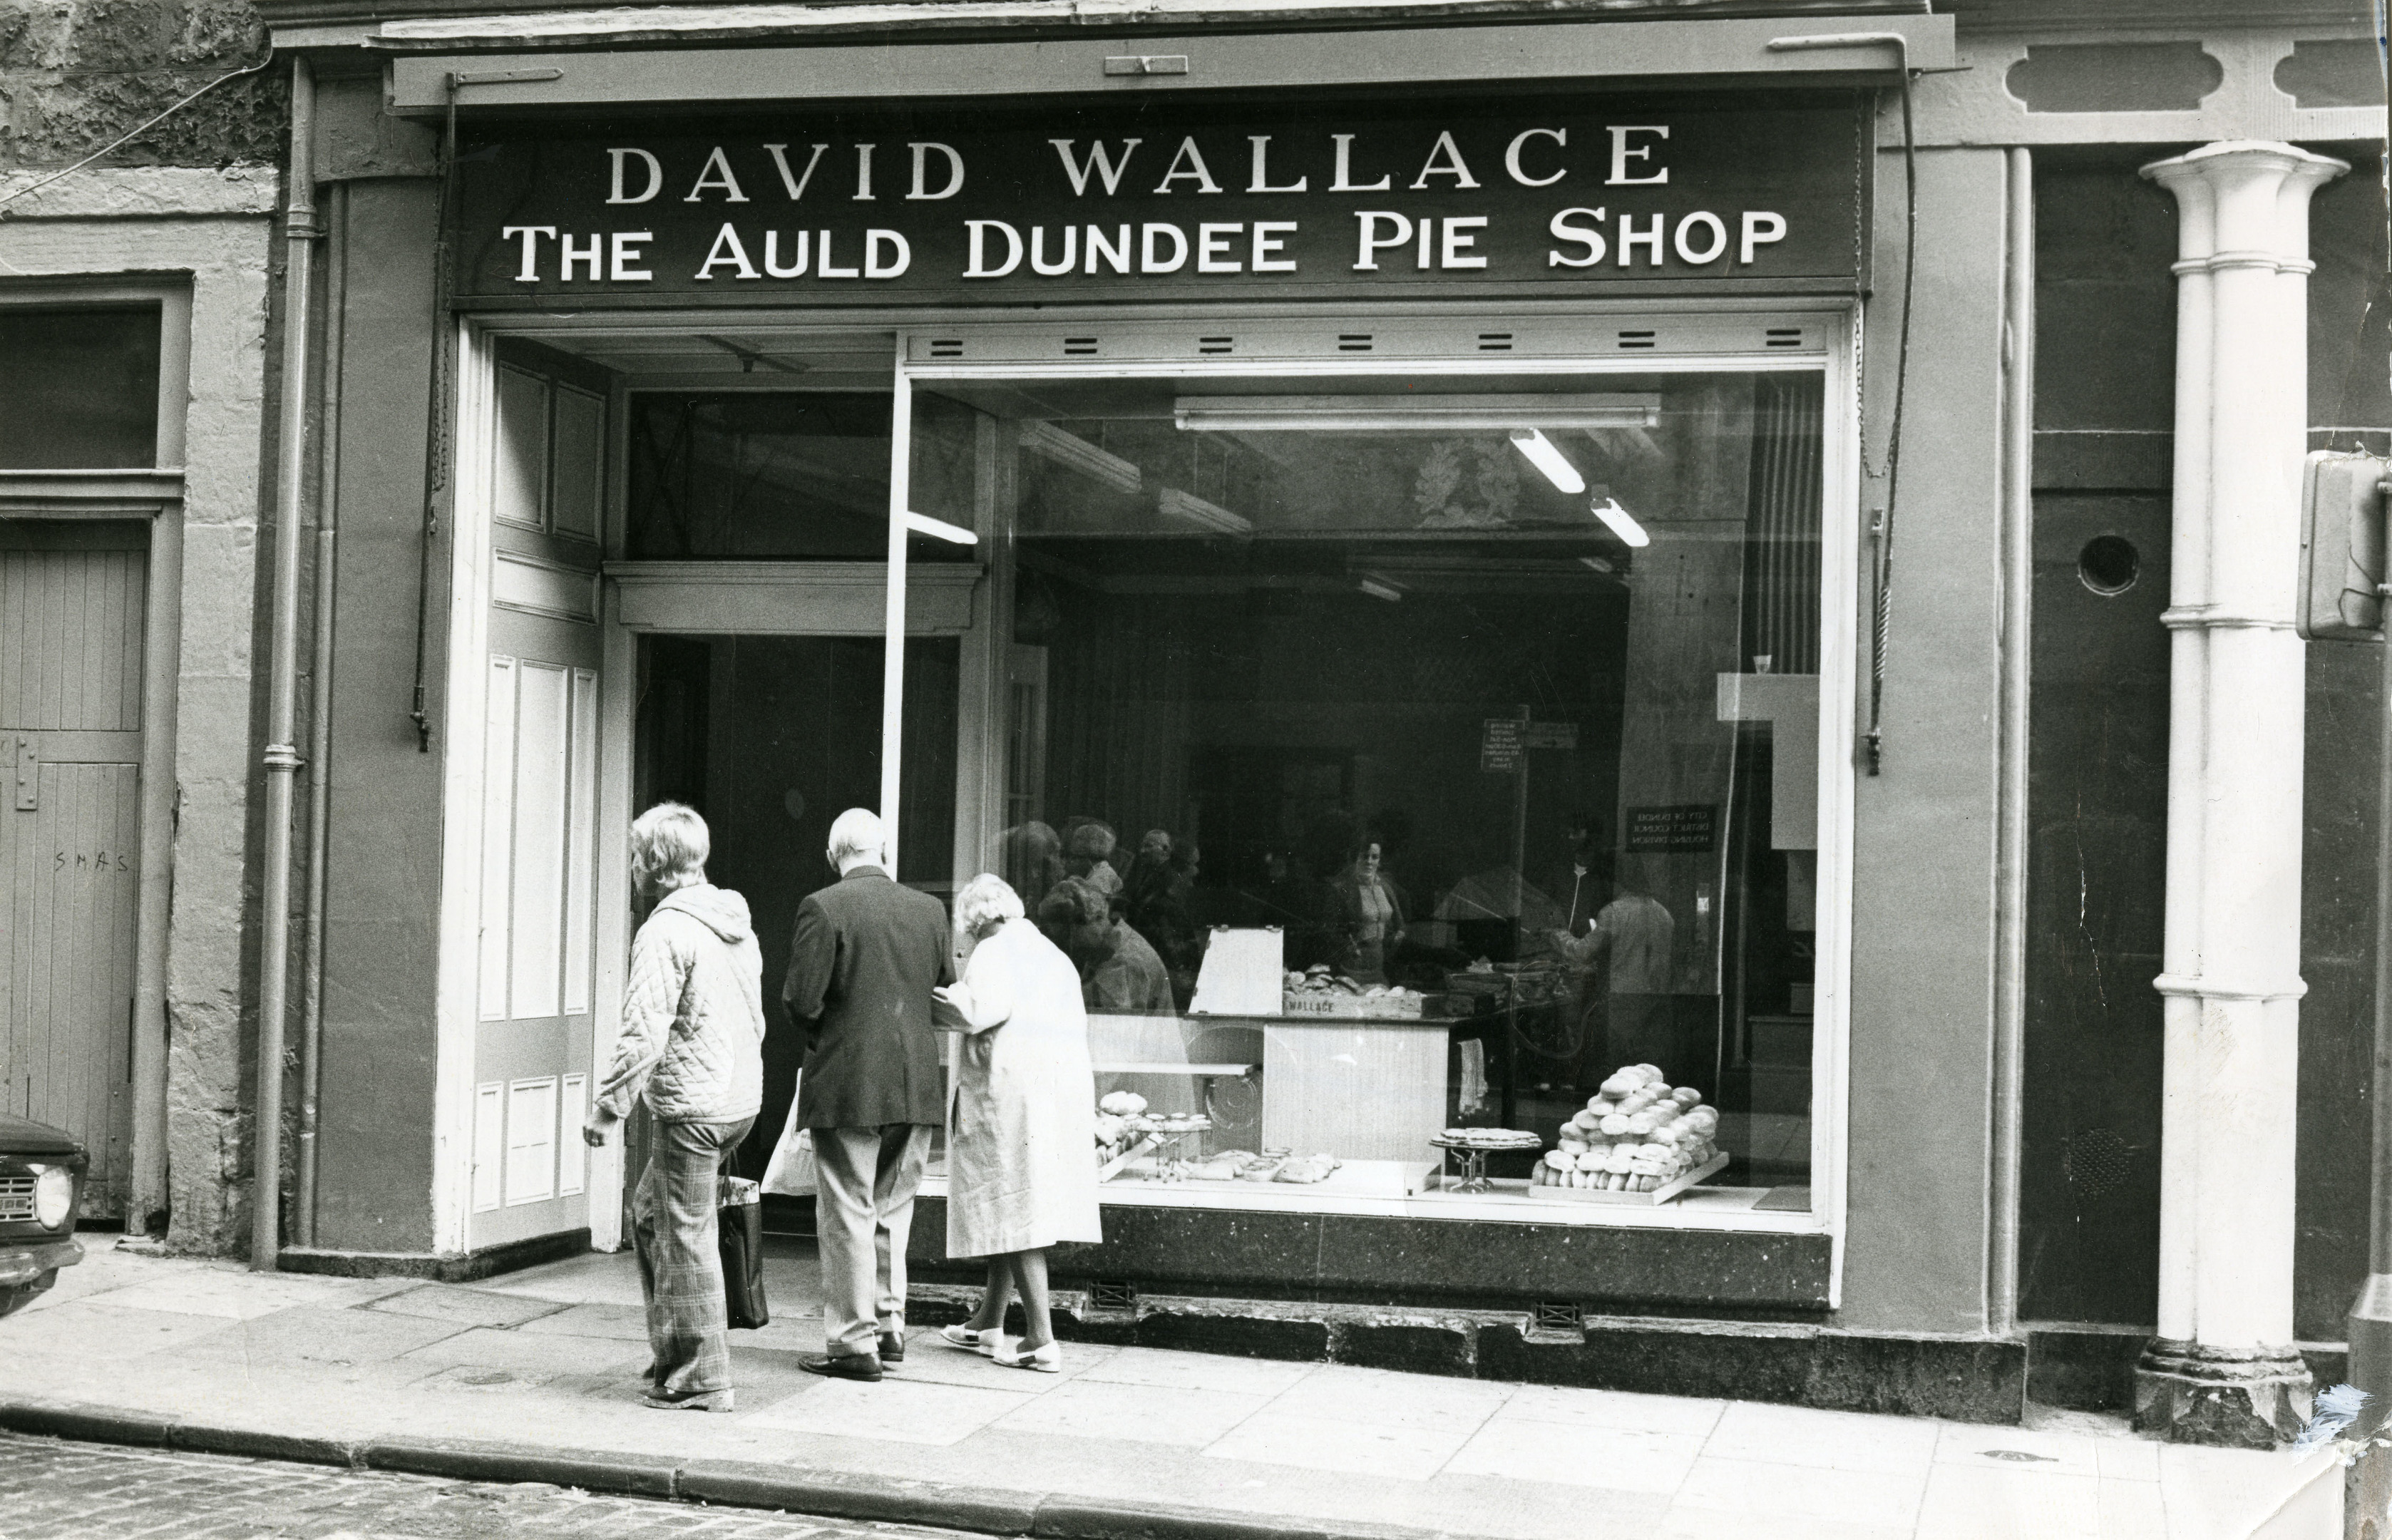 The Auld Dundee Pie Shop on Castle Street in 1977